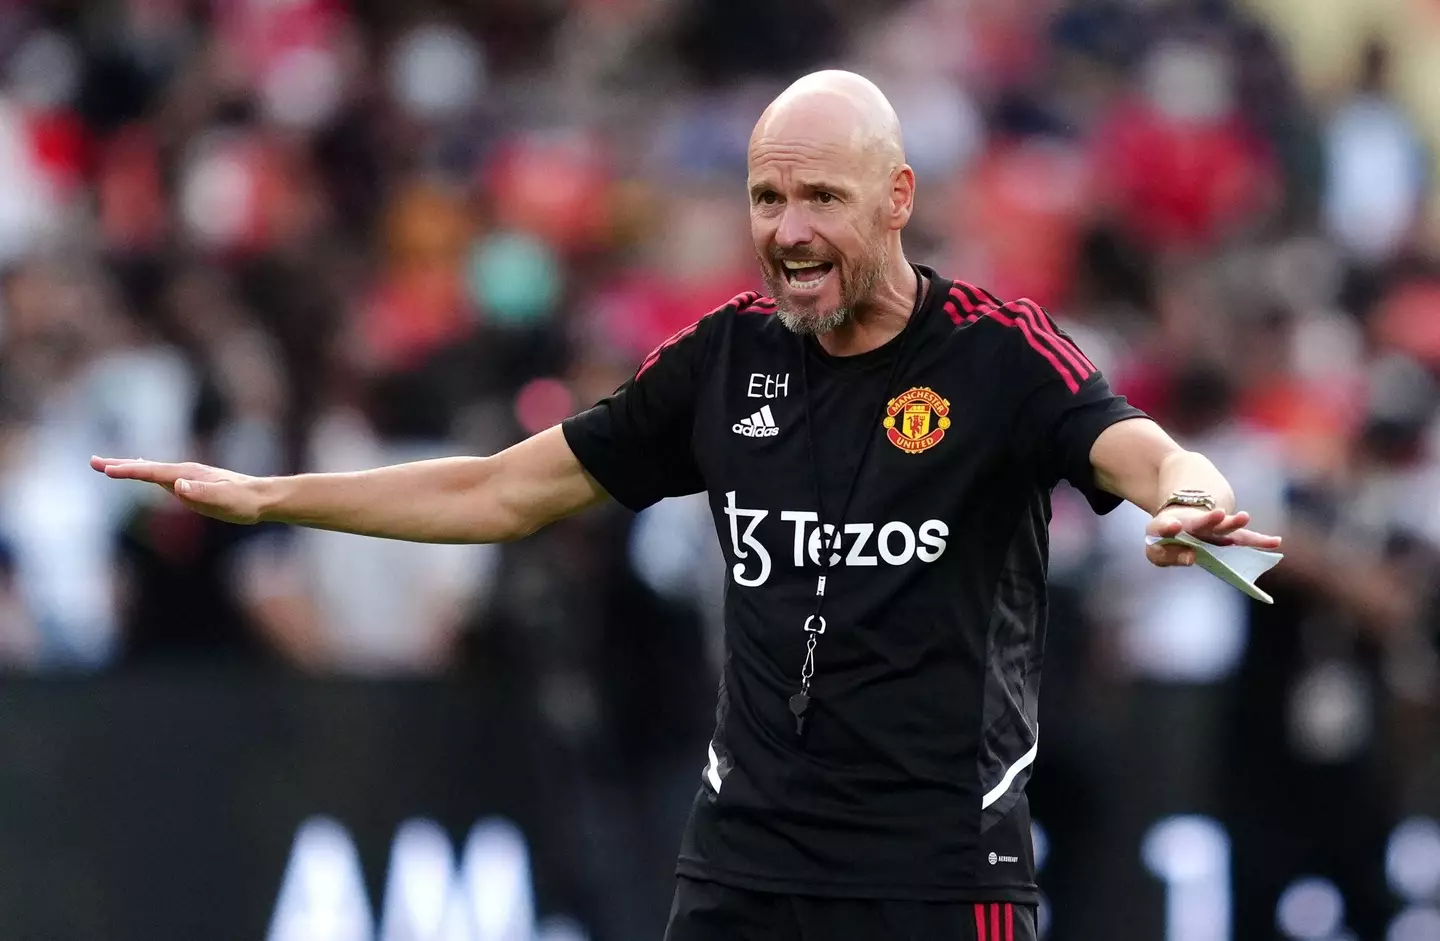 Ten Hag will reportedly earn a £3m bonus if United qualify for the Champions League (Image: Alamy)